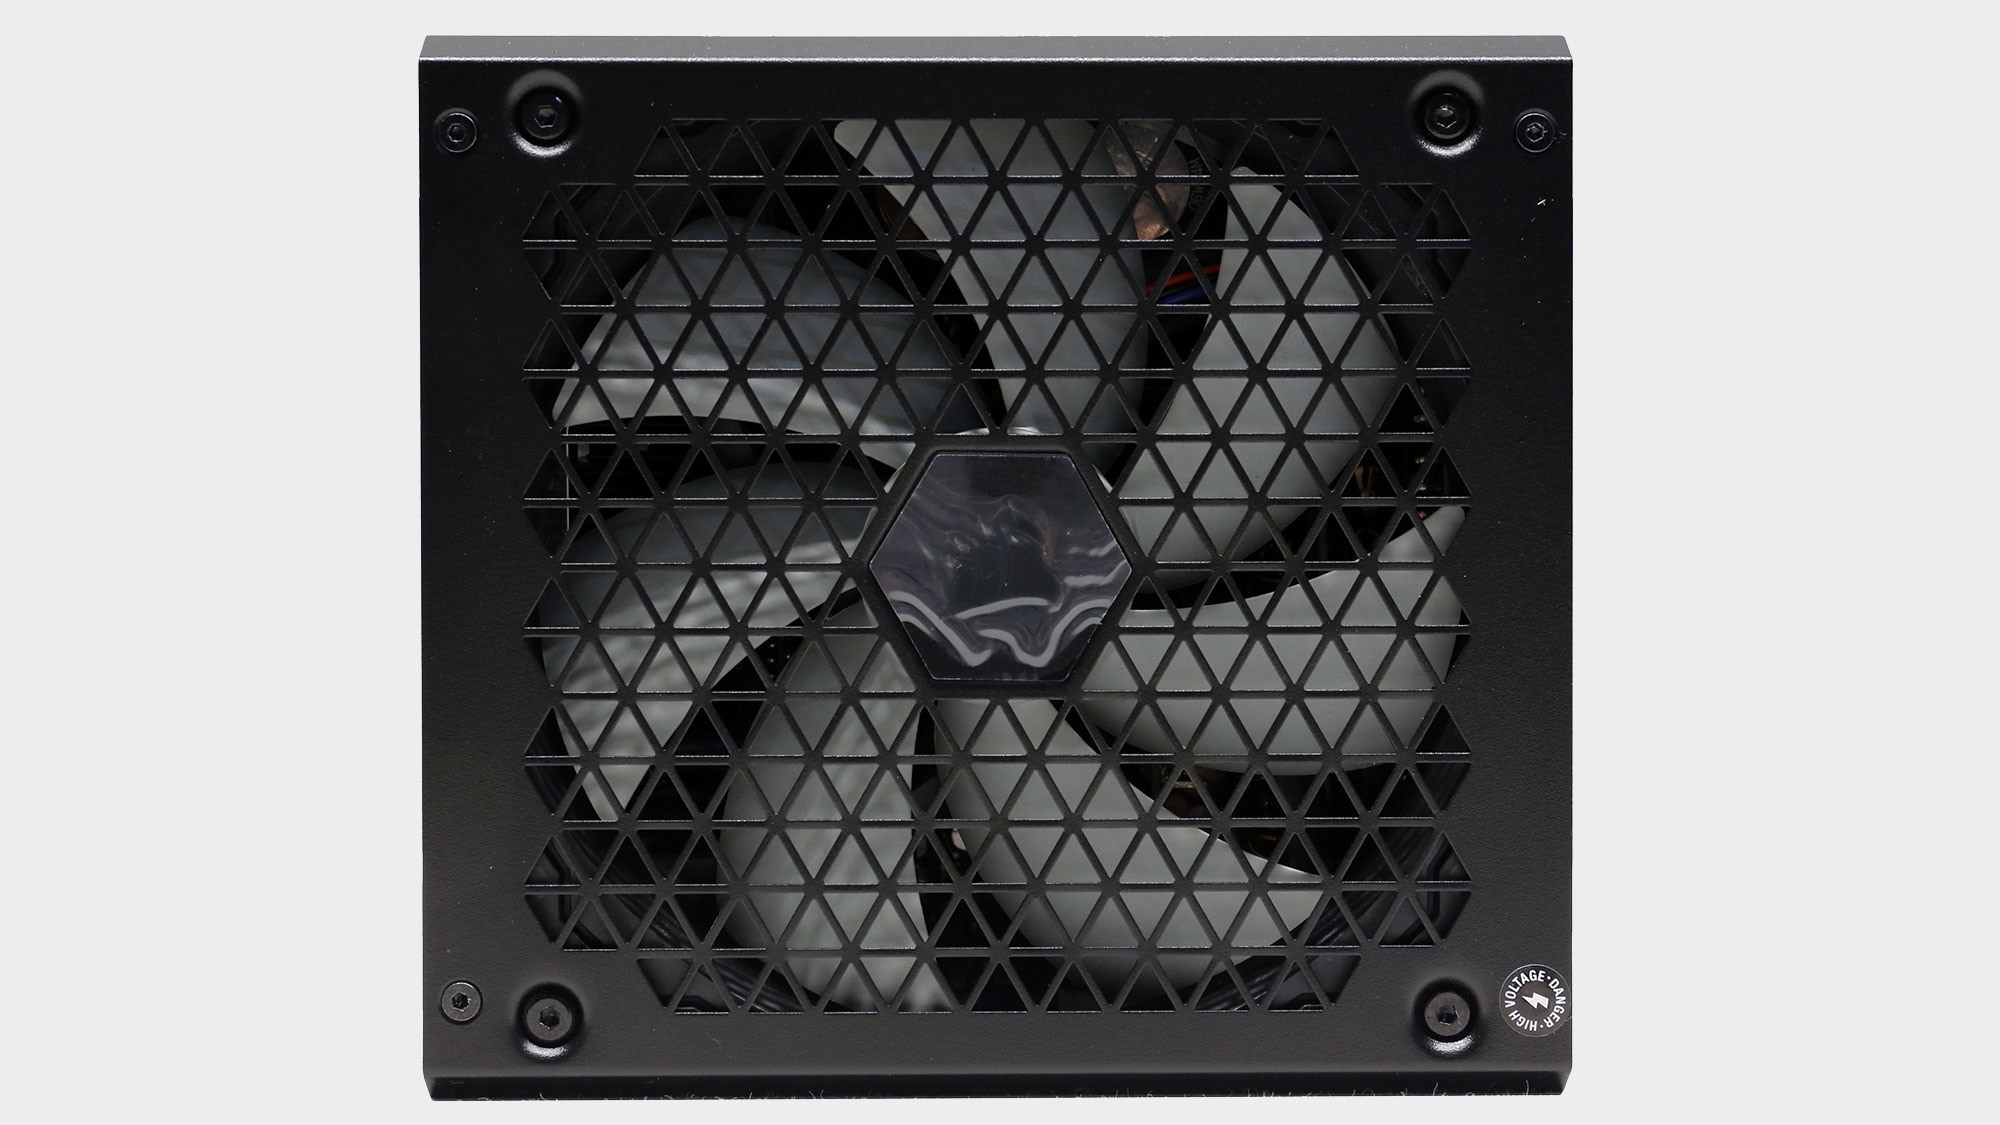 Corsair RM750x power supply pictured with and without box.